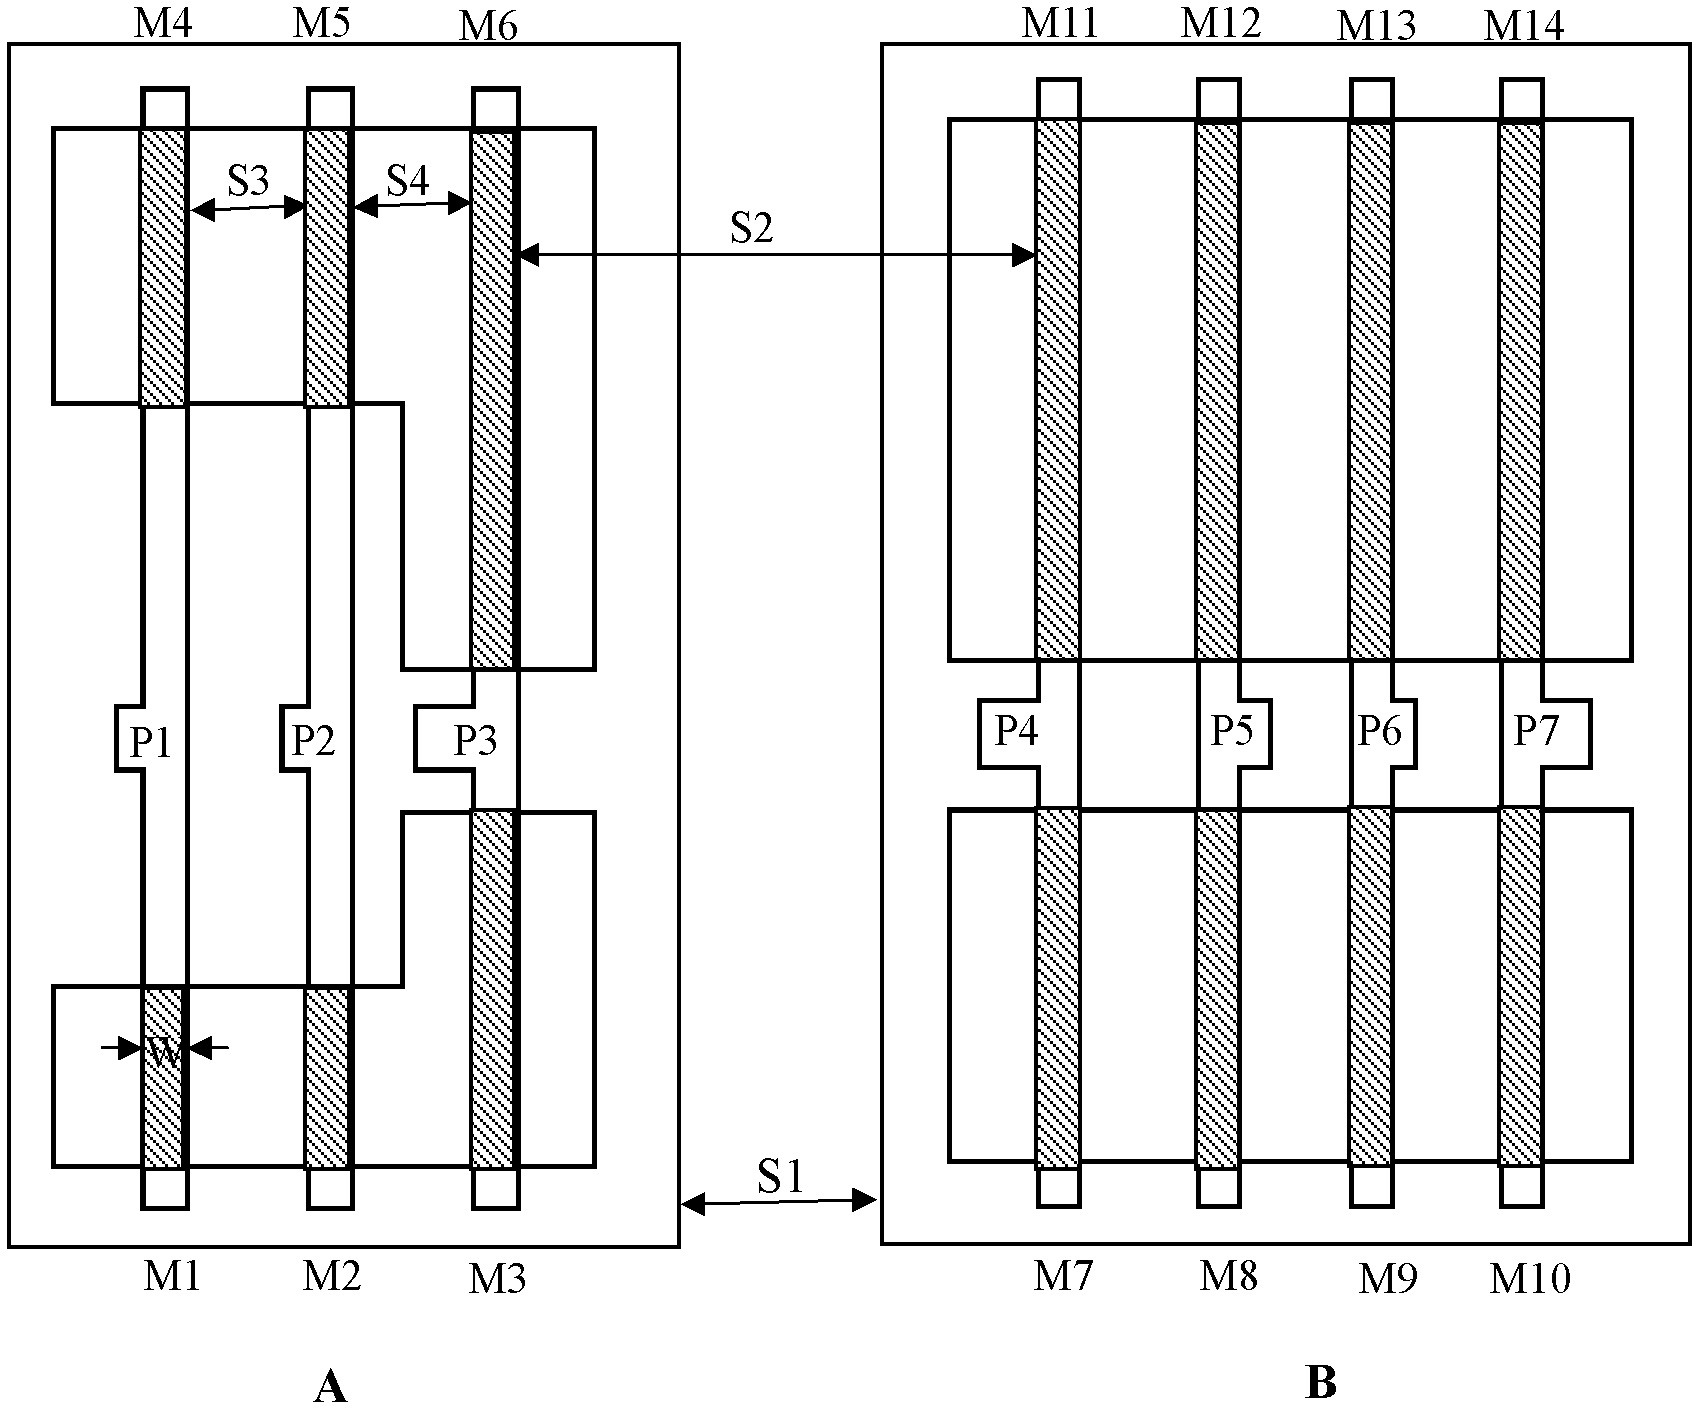 Insertion method for filling redundant polysilicon strip arrays in existing layout